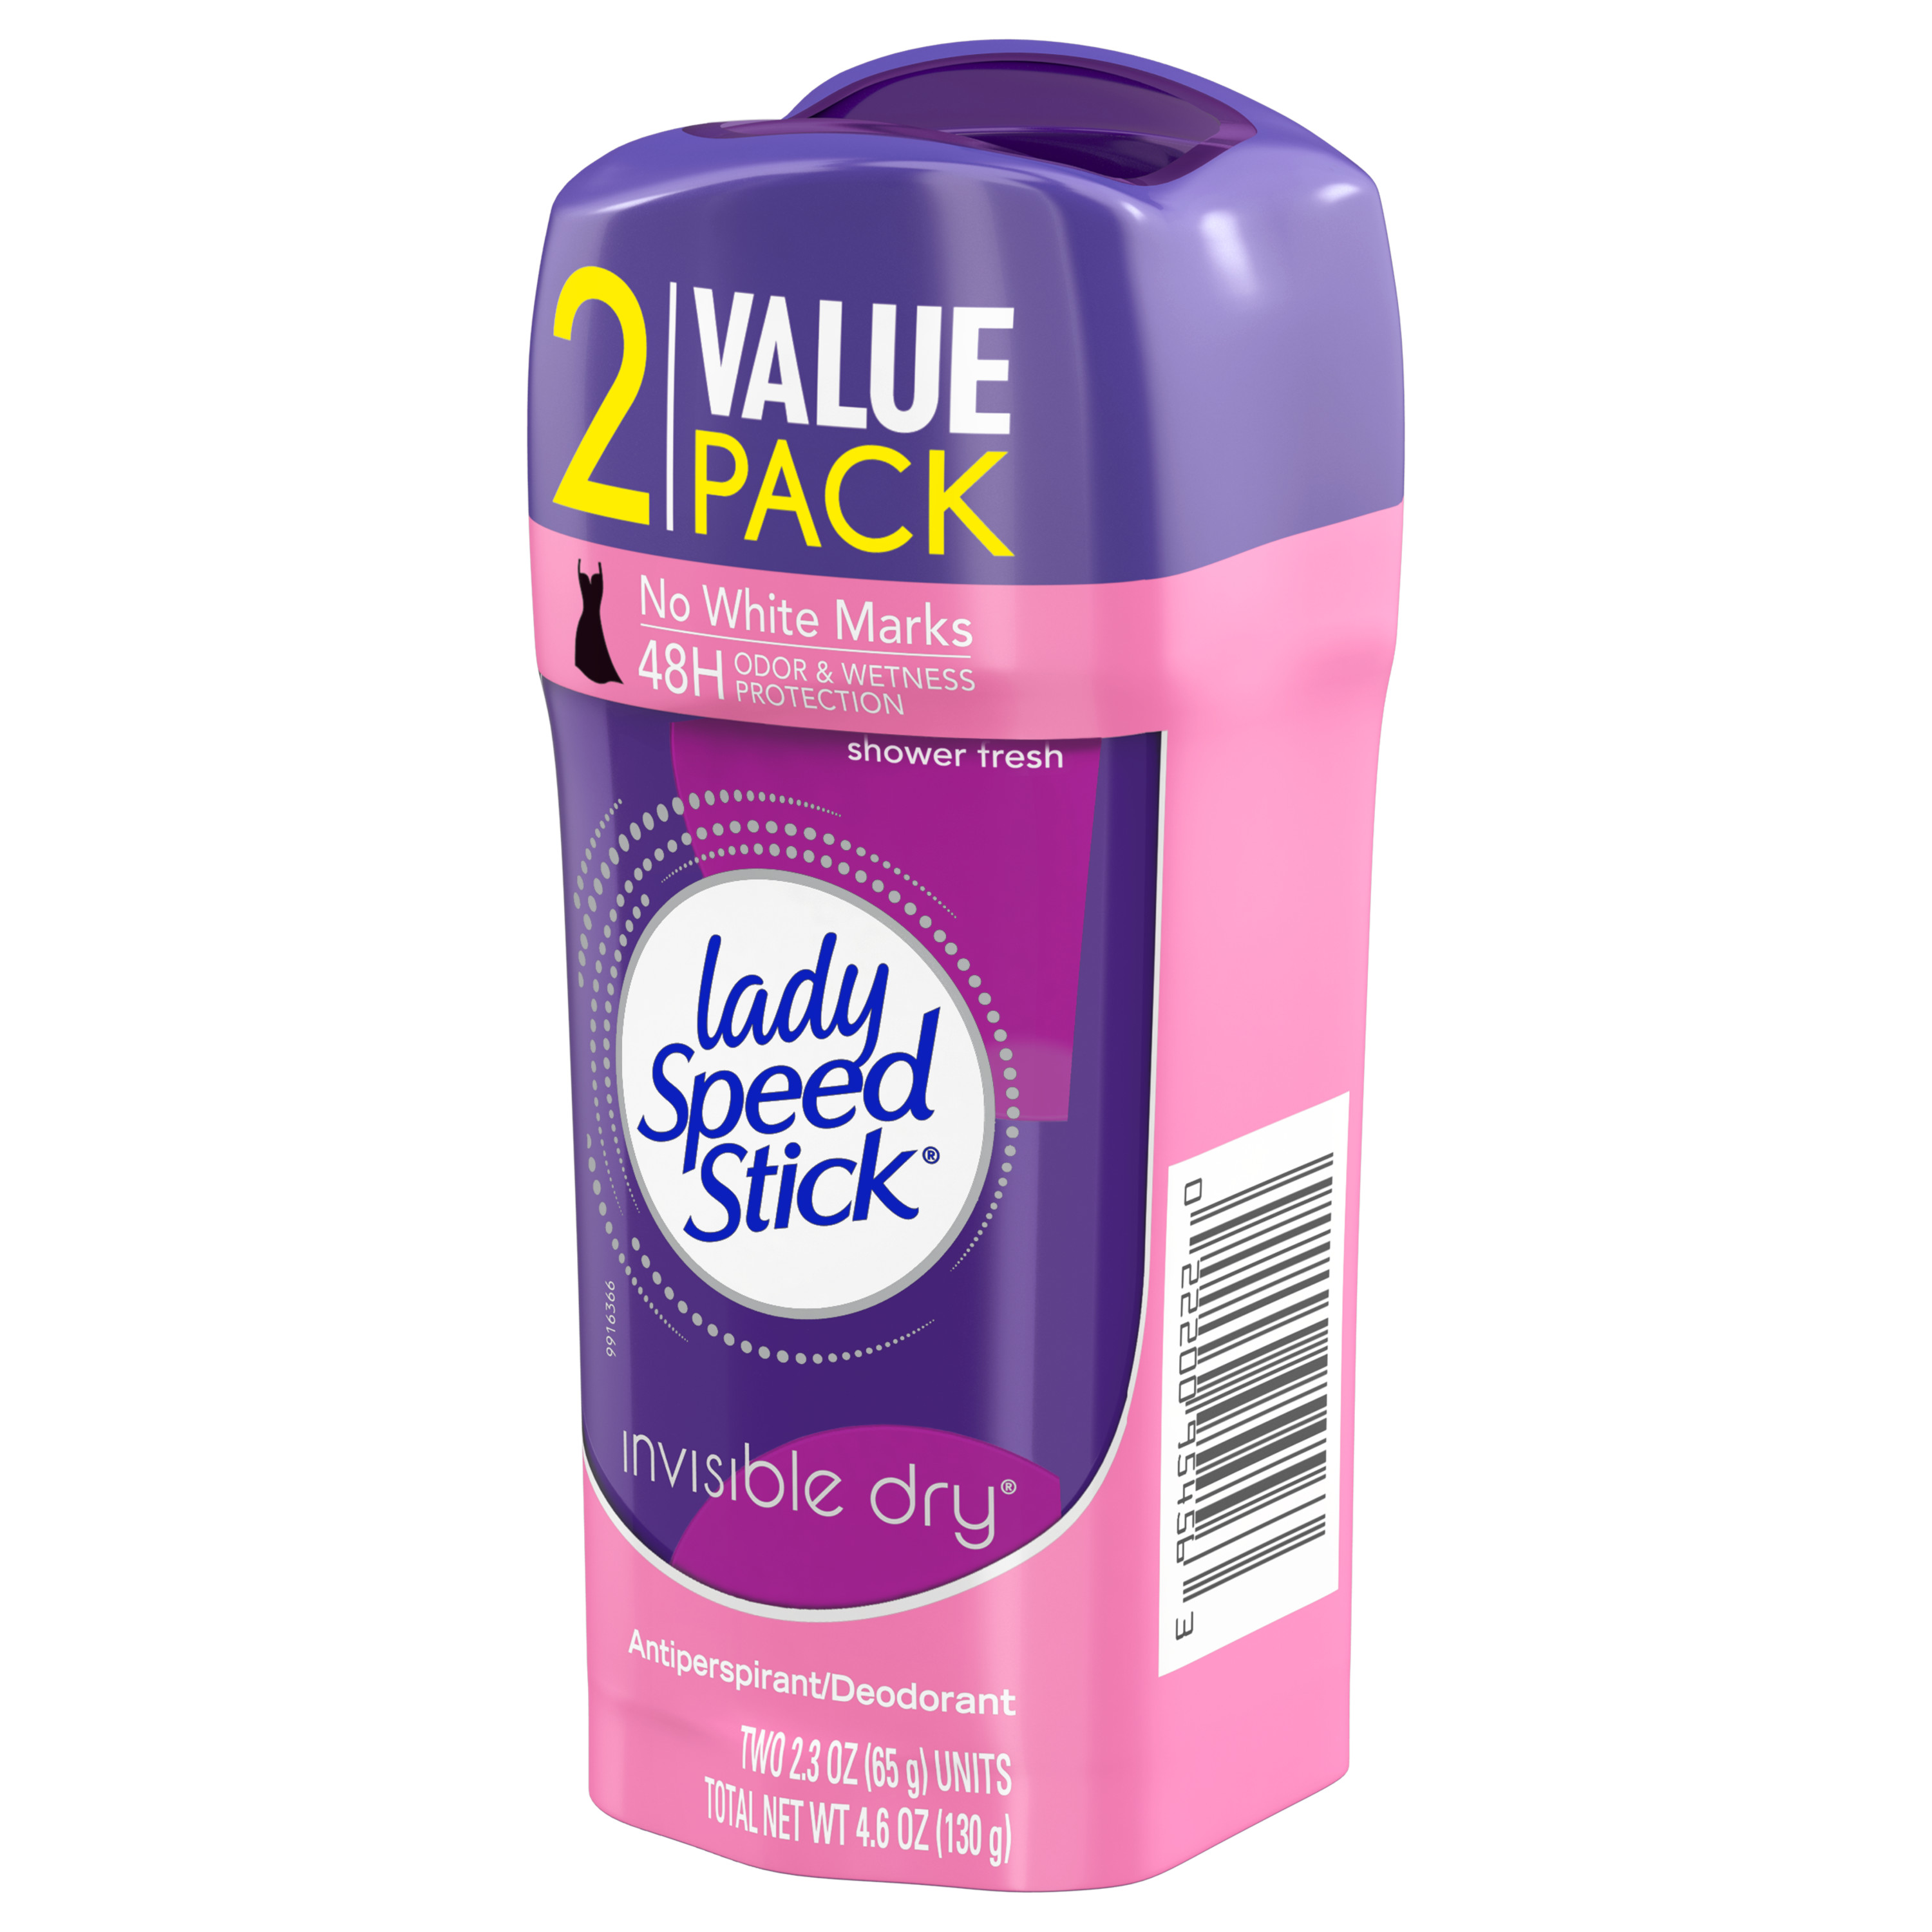 Lady Speed Stick Invisible Dry Antiperspirant Female Deodorant, Shower Fresh, 2 Pack, 2.3 oz - image 15 of 15